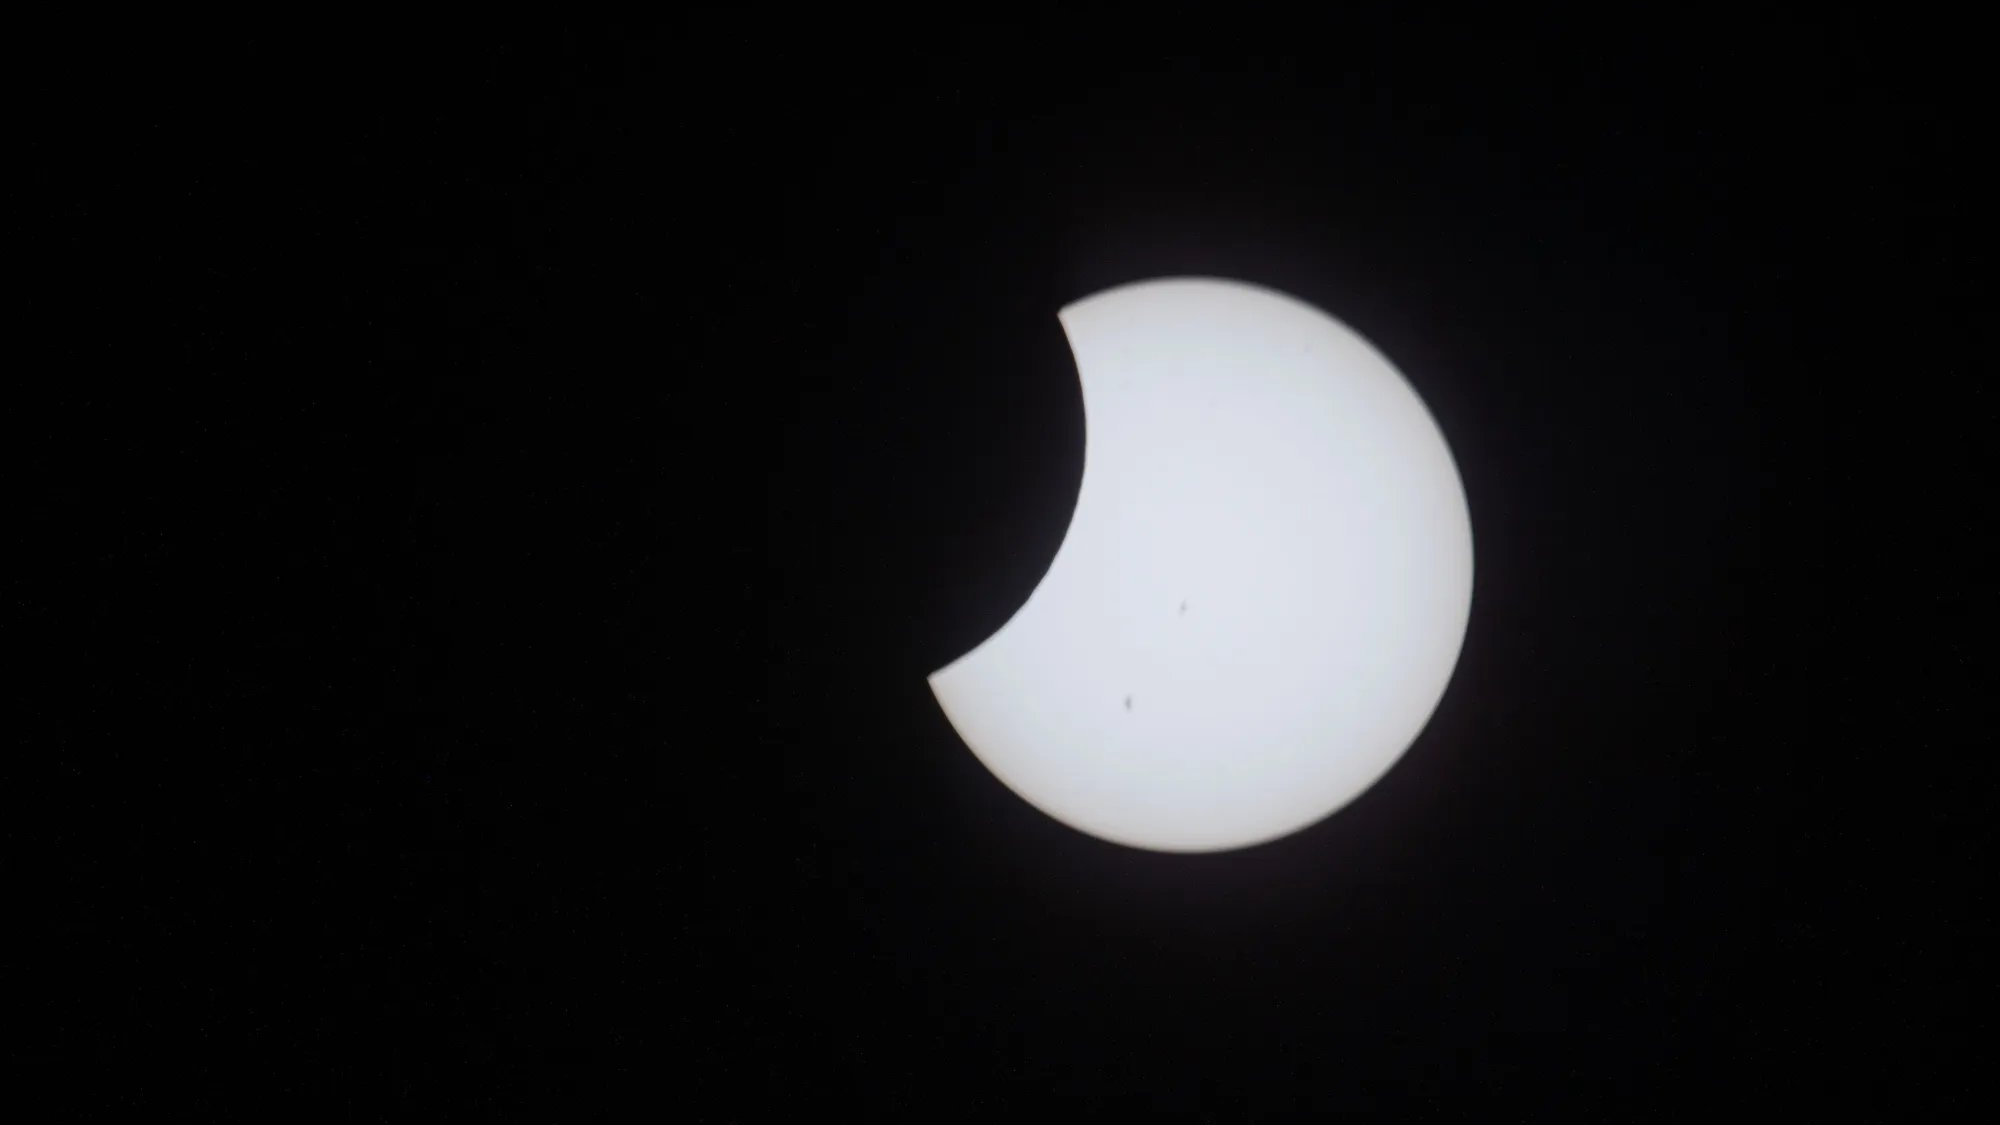 ISS astronauts ready to watch the solar eclipse from space on April 8 Space